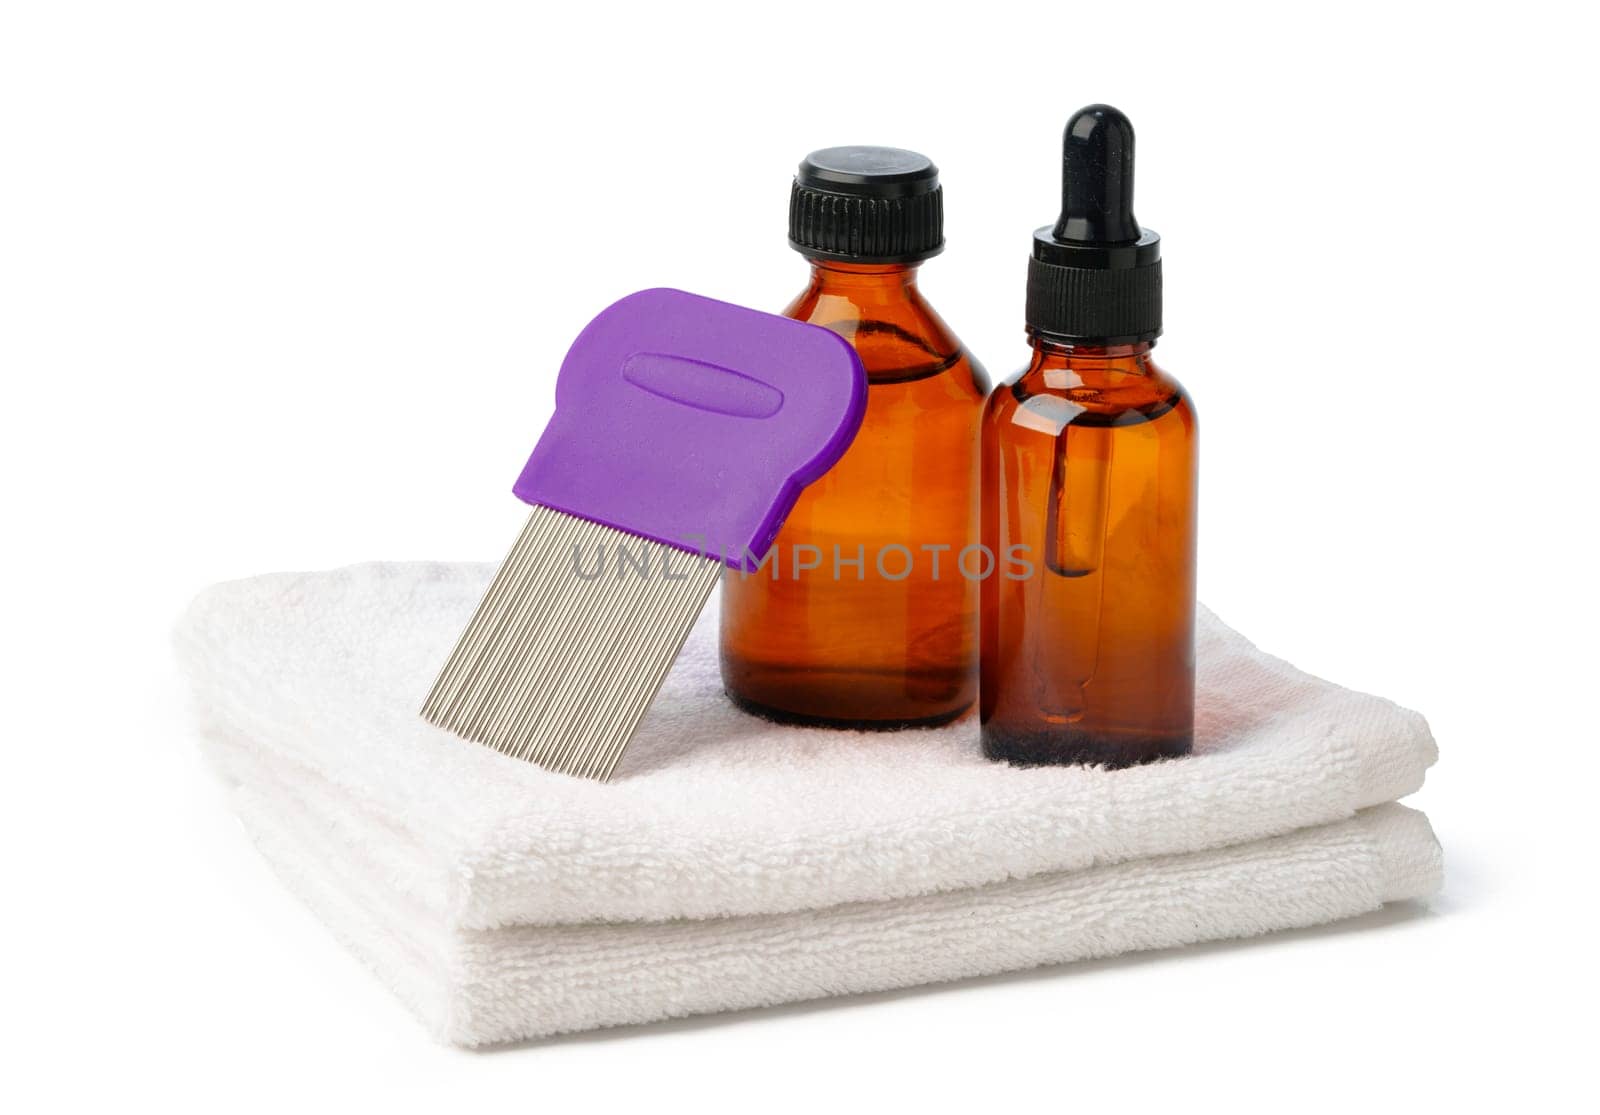 Comb, anti lice medicine and towel on white background close up